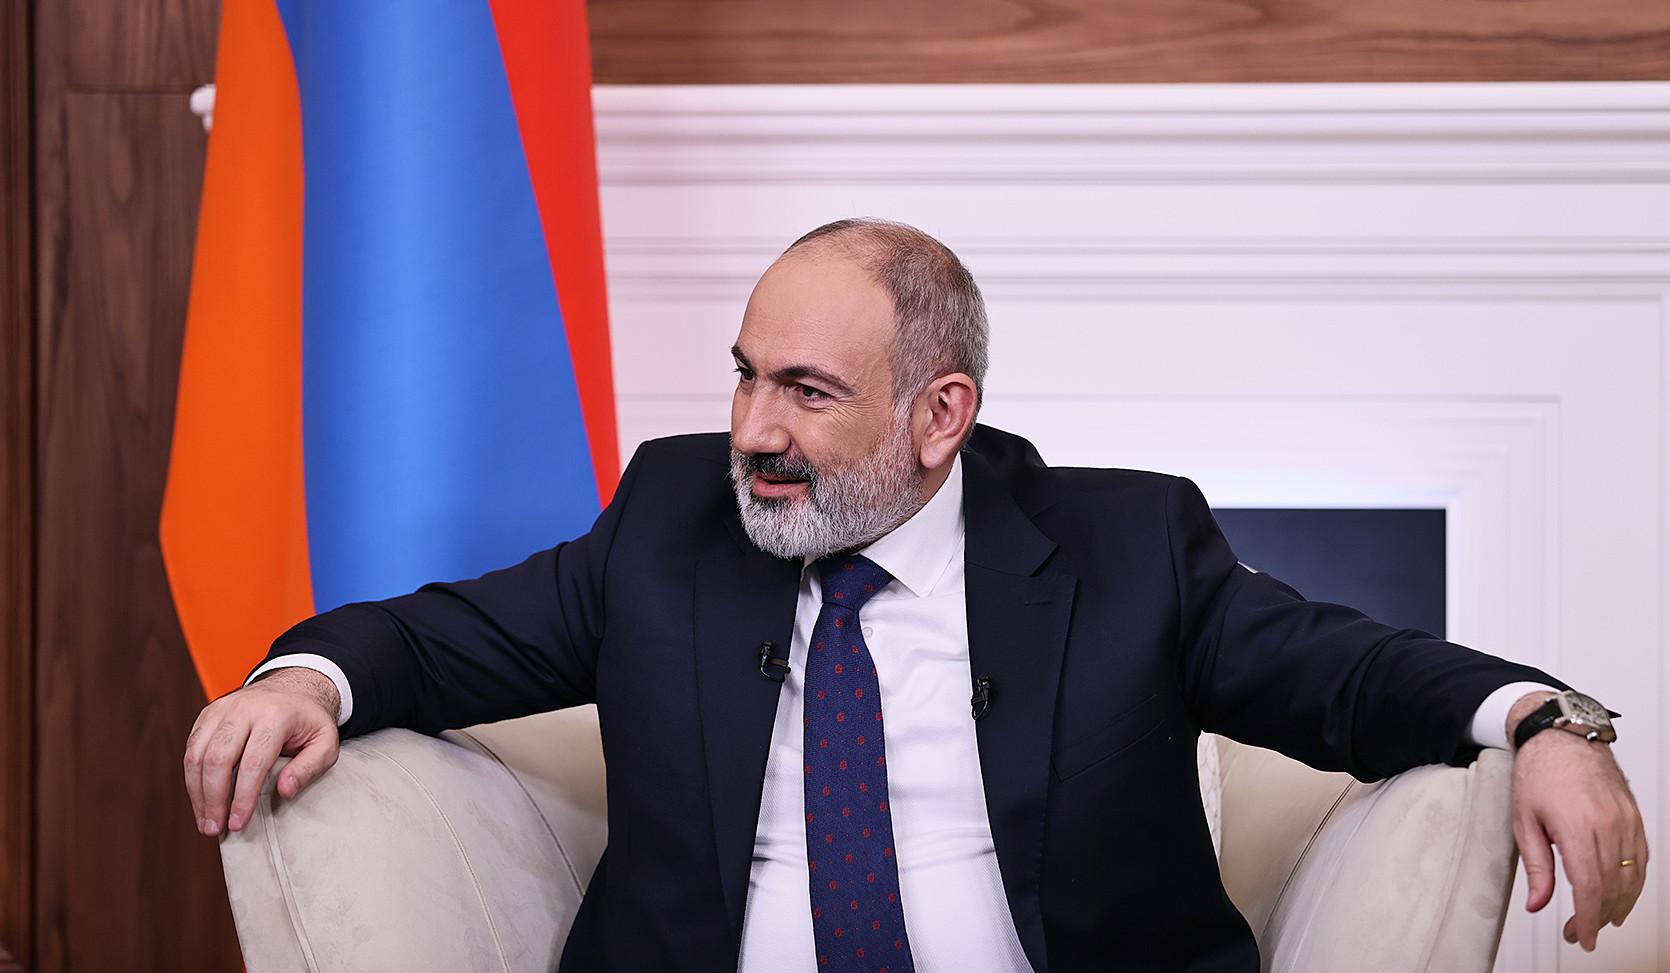 Co-chairs of border delimitation commissions  have tried to build trust and confidence molecule by molecule: Pashinyan